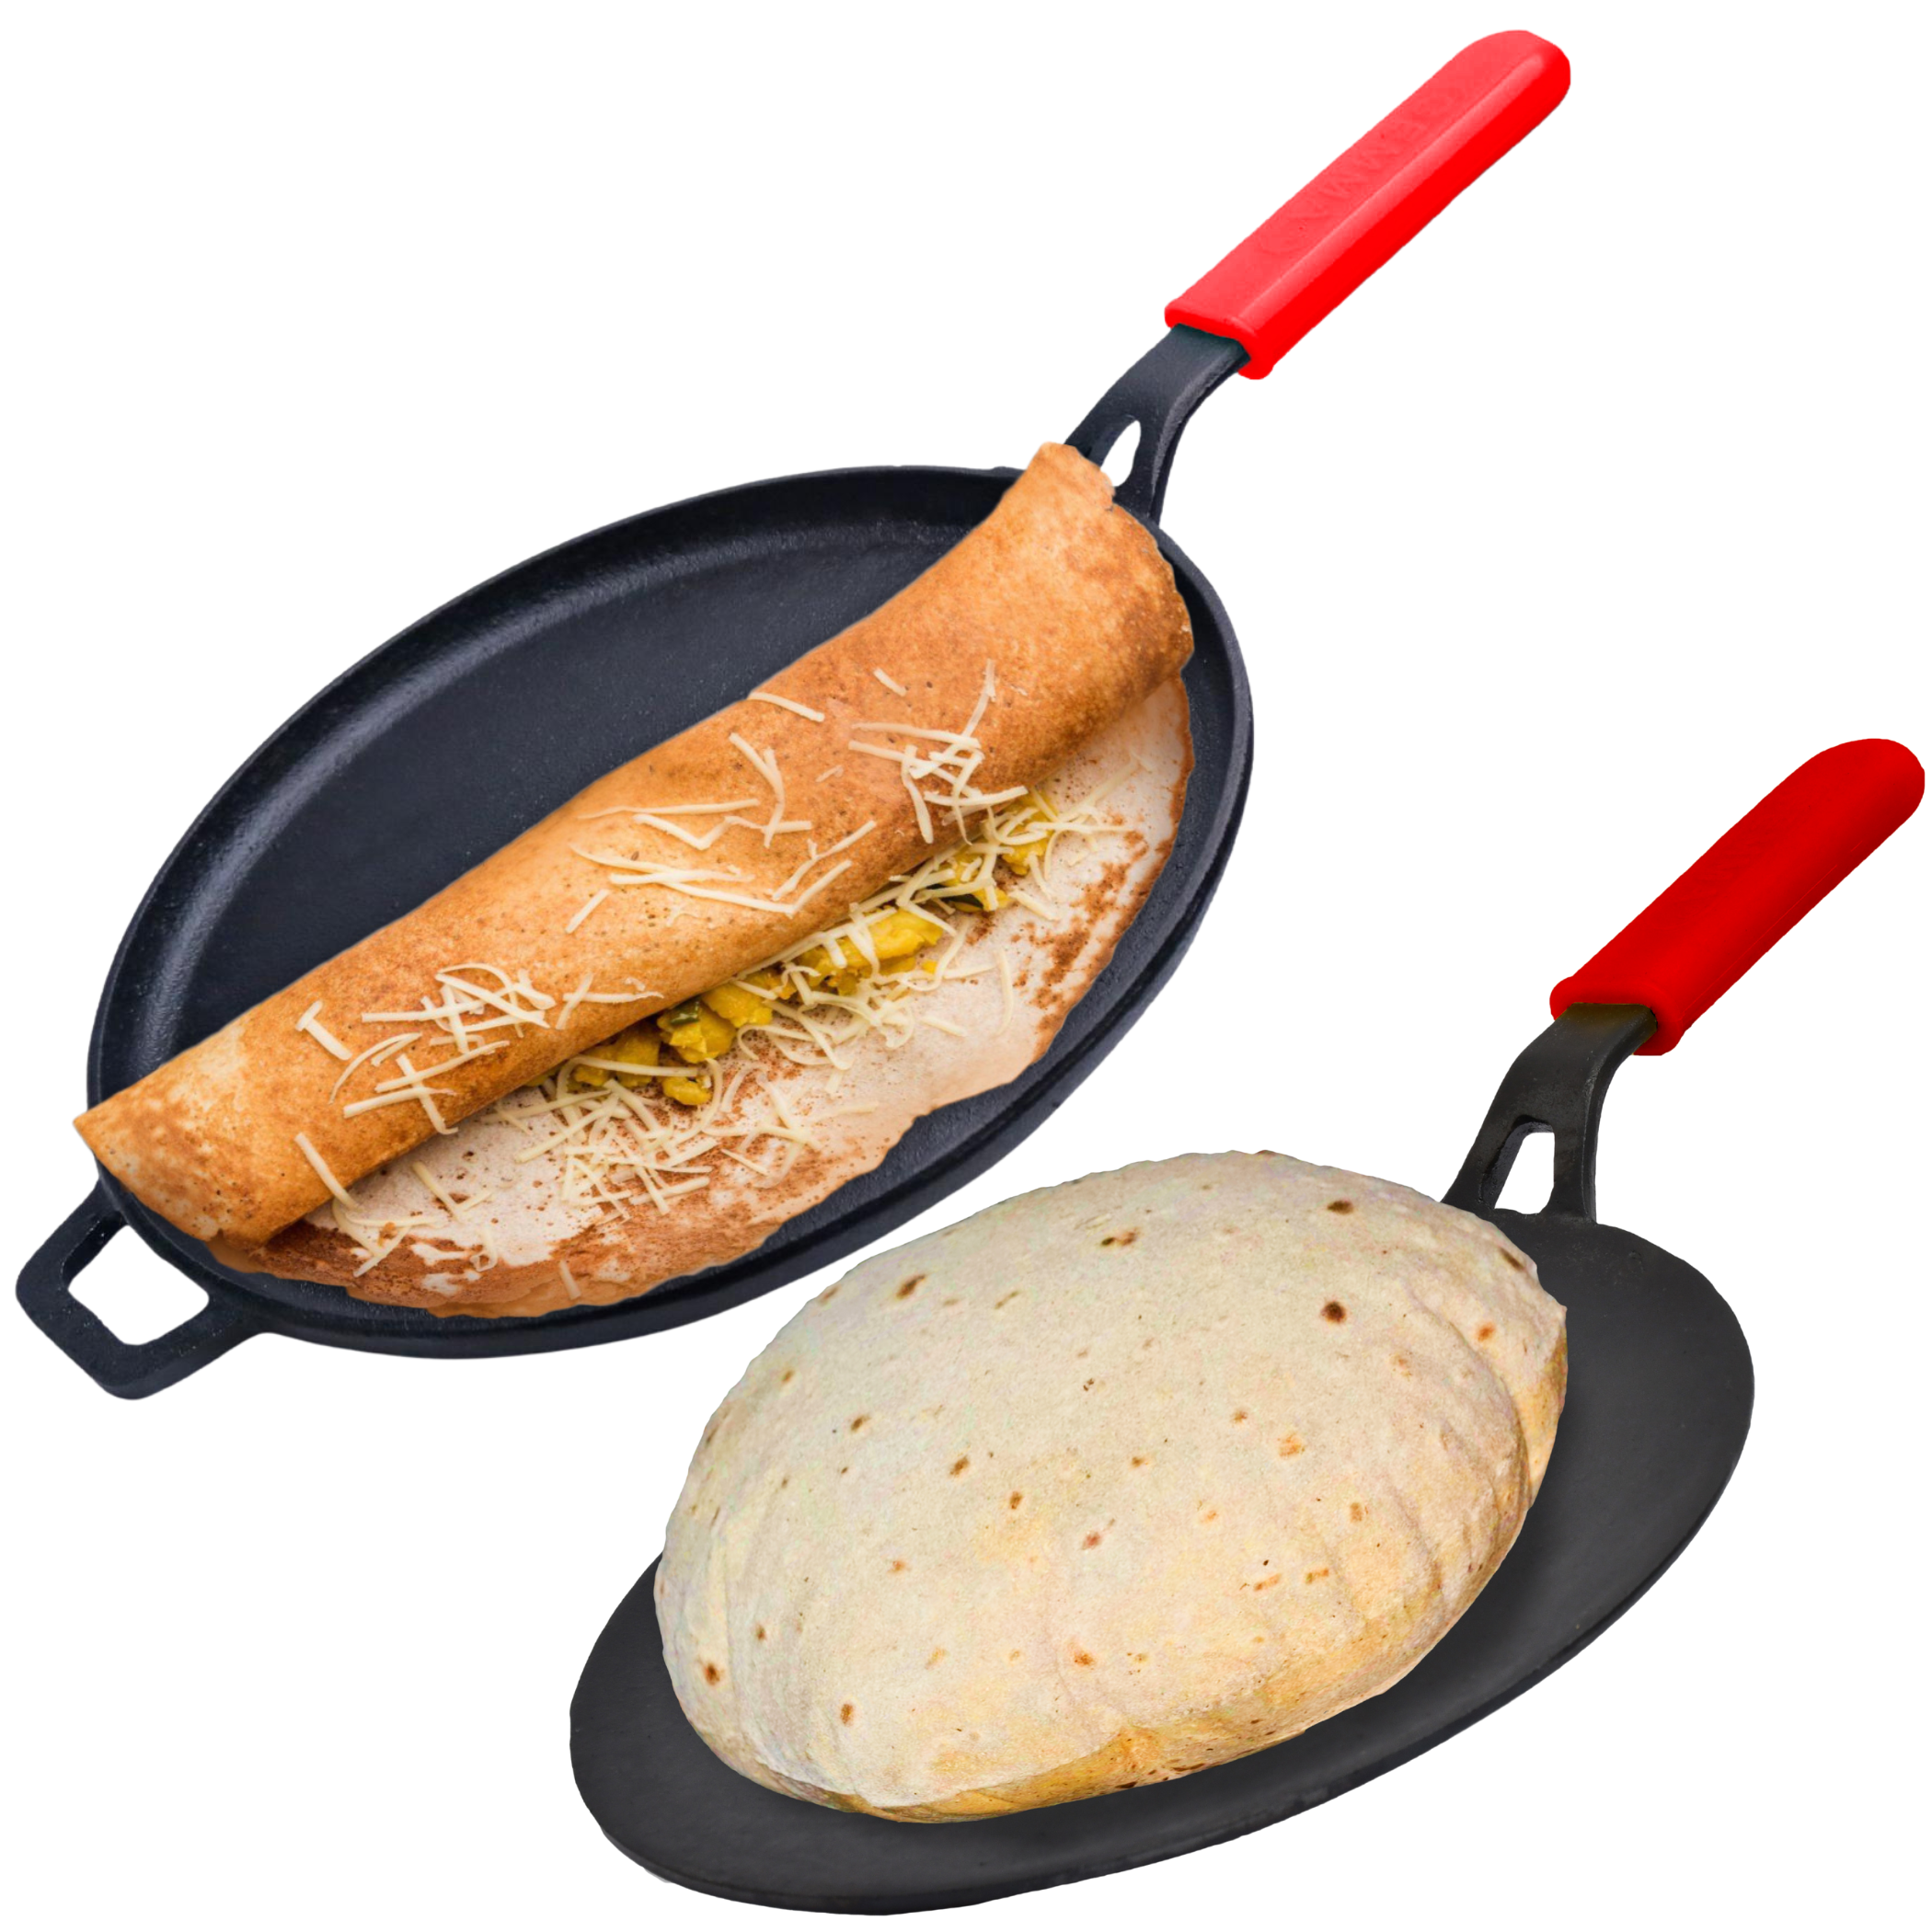  Meyer Pre-Seasoned Cast Iron 2 in 1 Grill and Griddle Pan, Cast Iron Tawa for Dosa, Iron Cookware for Kitchen, Roti Tawa Cast Iron